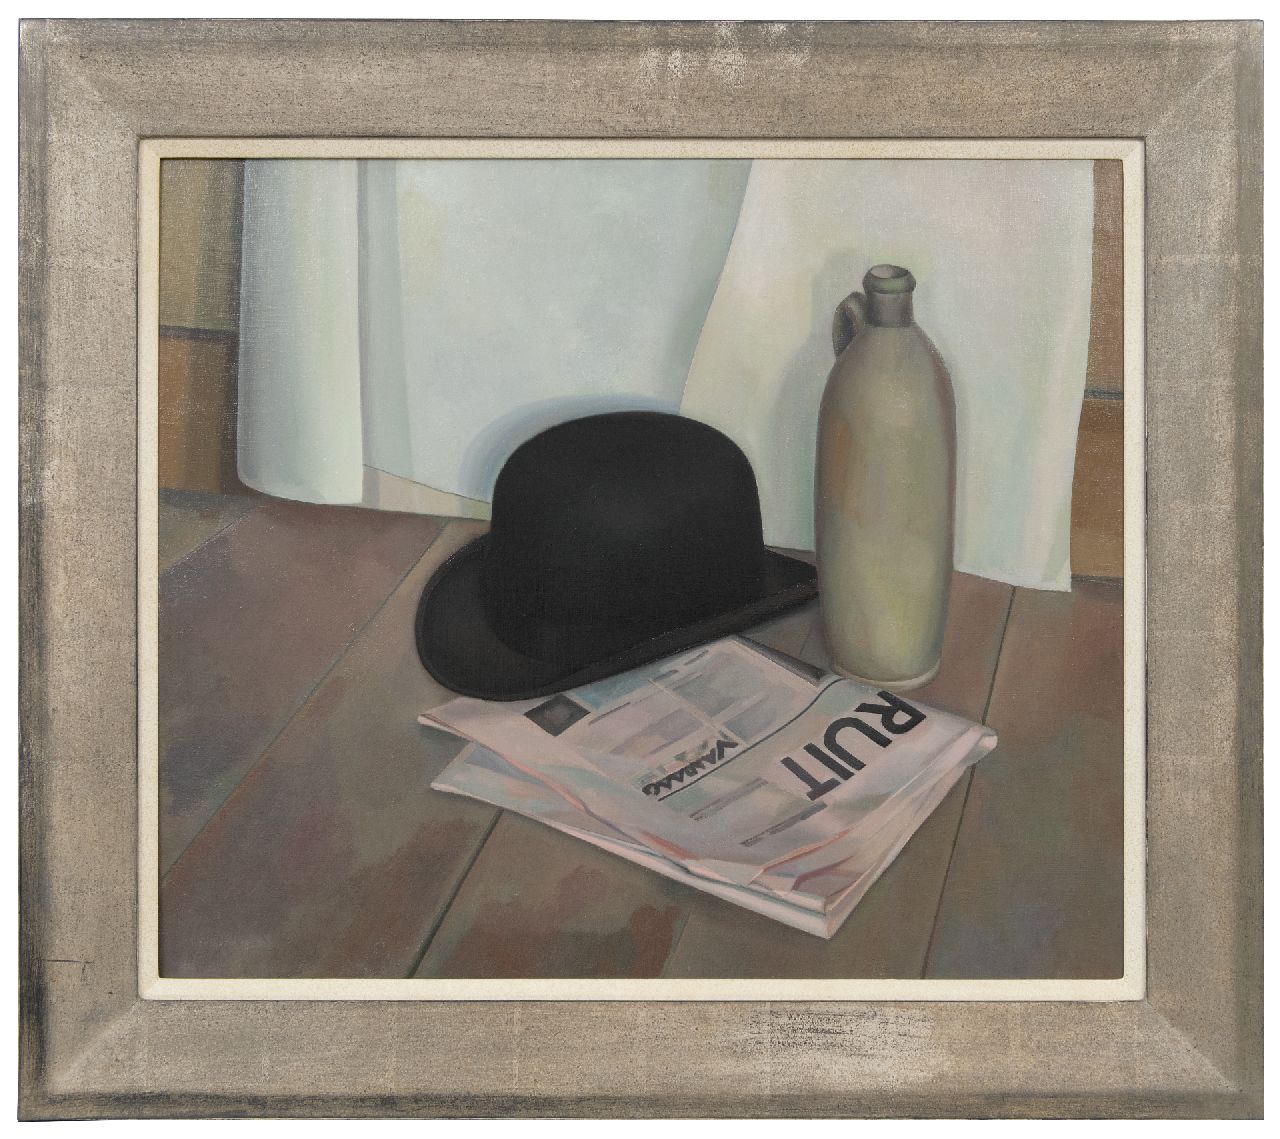 Berg J.M. van den | Josna Michiel 'Jos' van den Berg | Paintings offered for sale | Still life with bowler hat, jug and the dayly paper Vooruit, oil on canvas 60.3 x 70.5 cm, signed on the stretcher